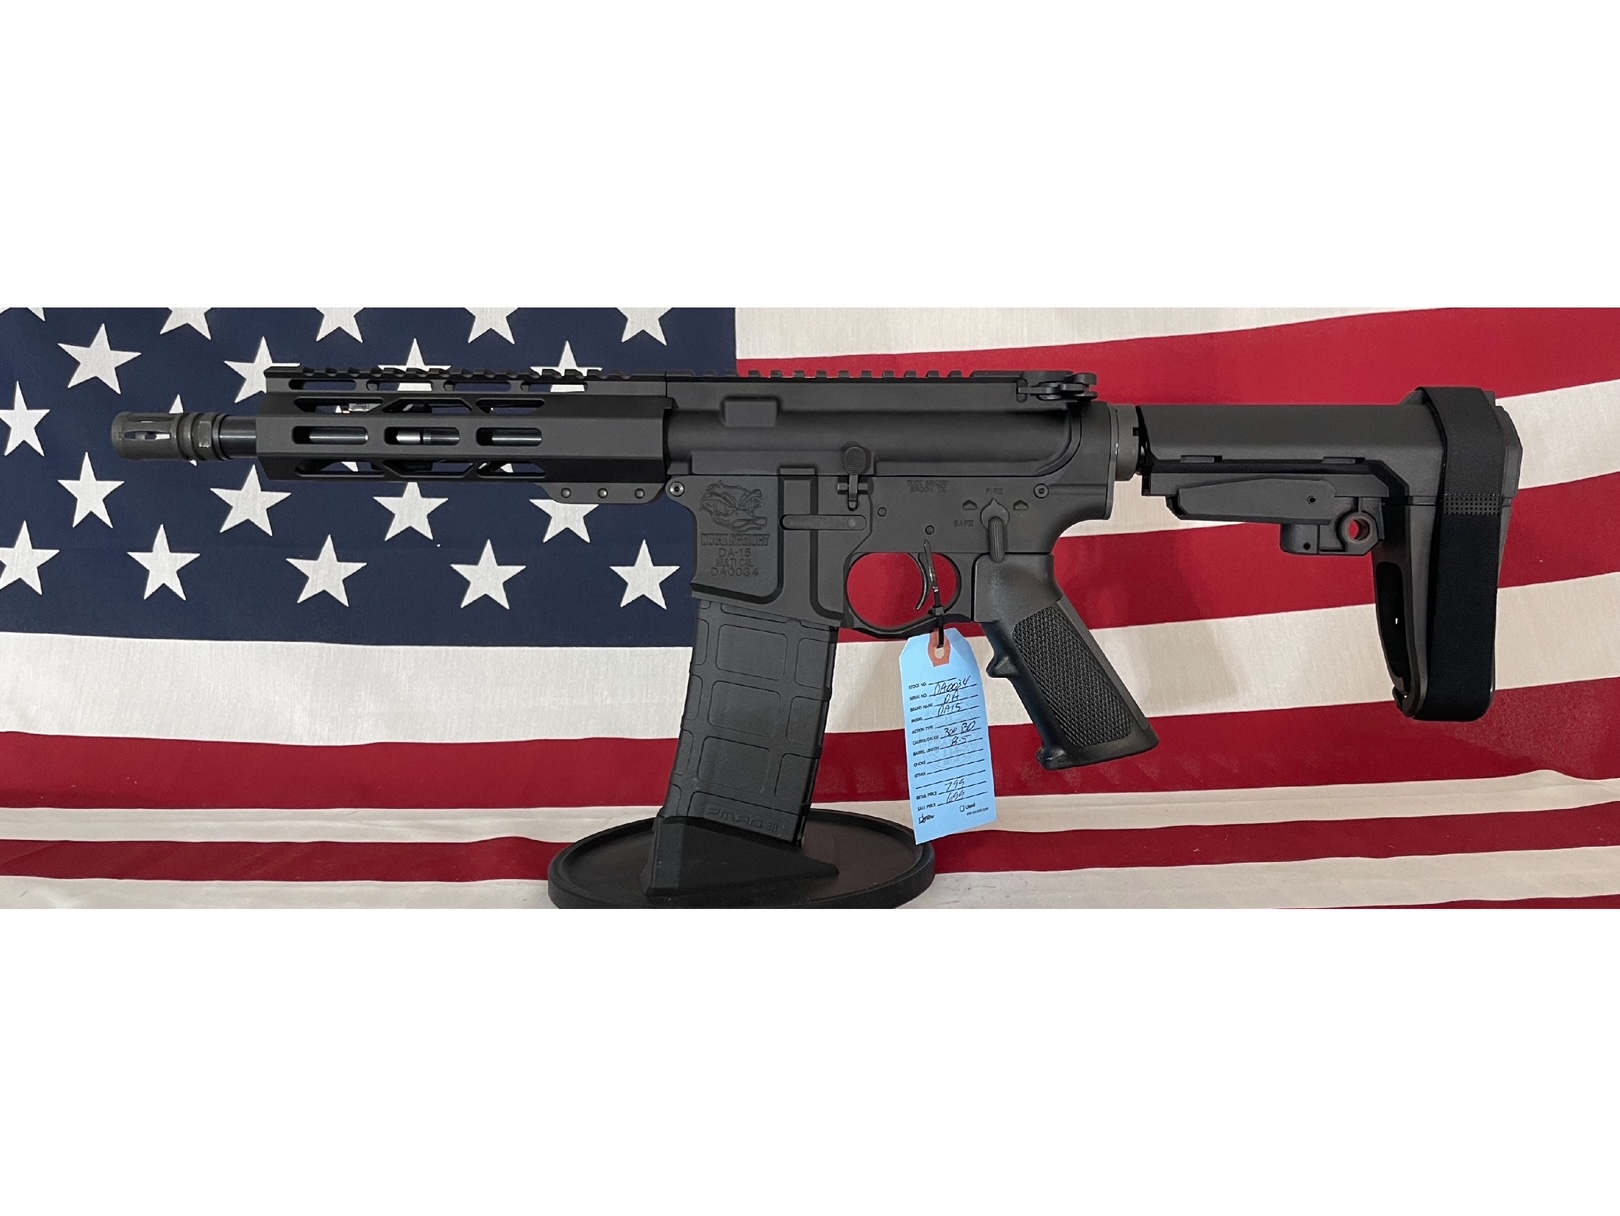 AR-15 Pistol 300 BLACKOUT WITH AGB - RANGER Series